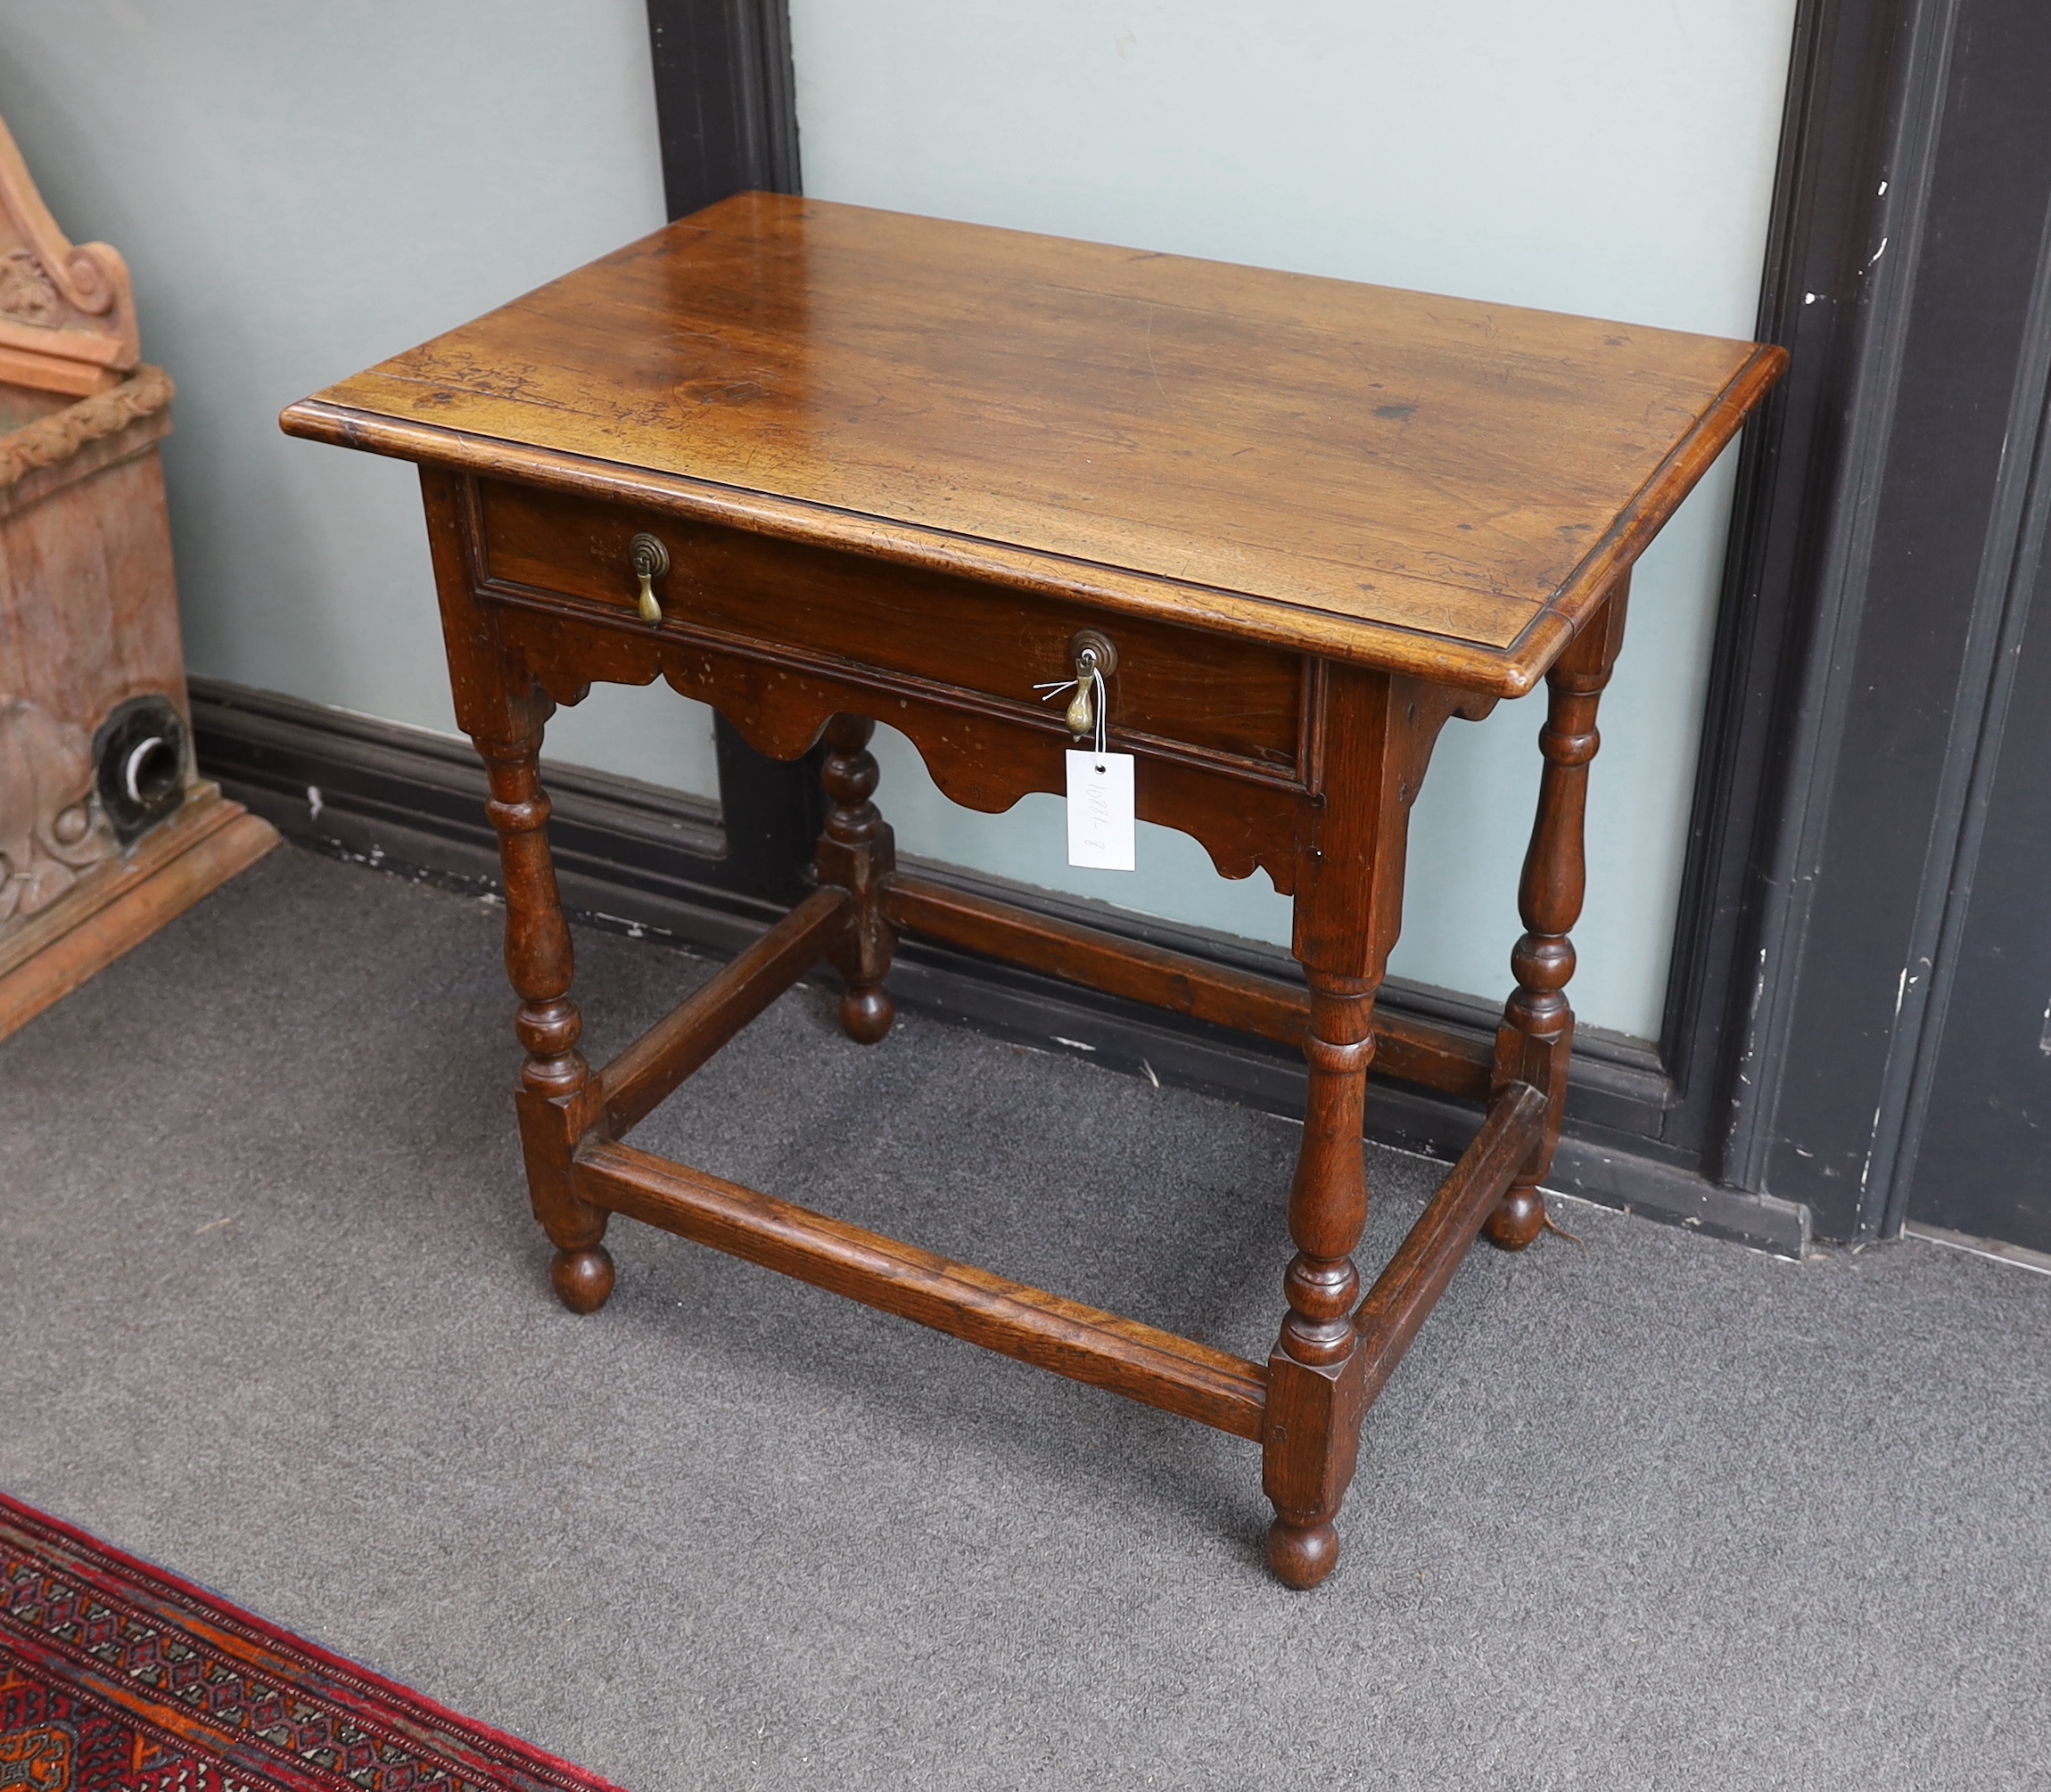 An 18th century and later rectangular walnut and oak side table, width 76cm, depth 49cm, height 69cm